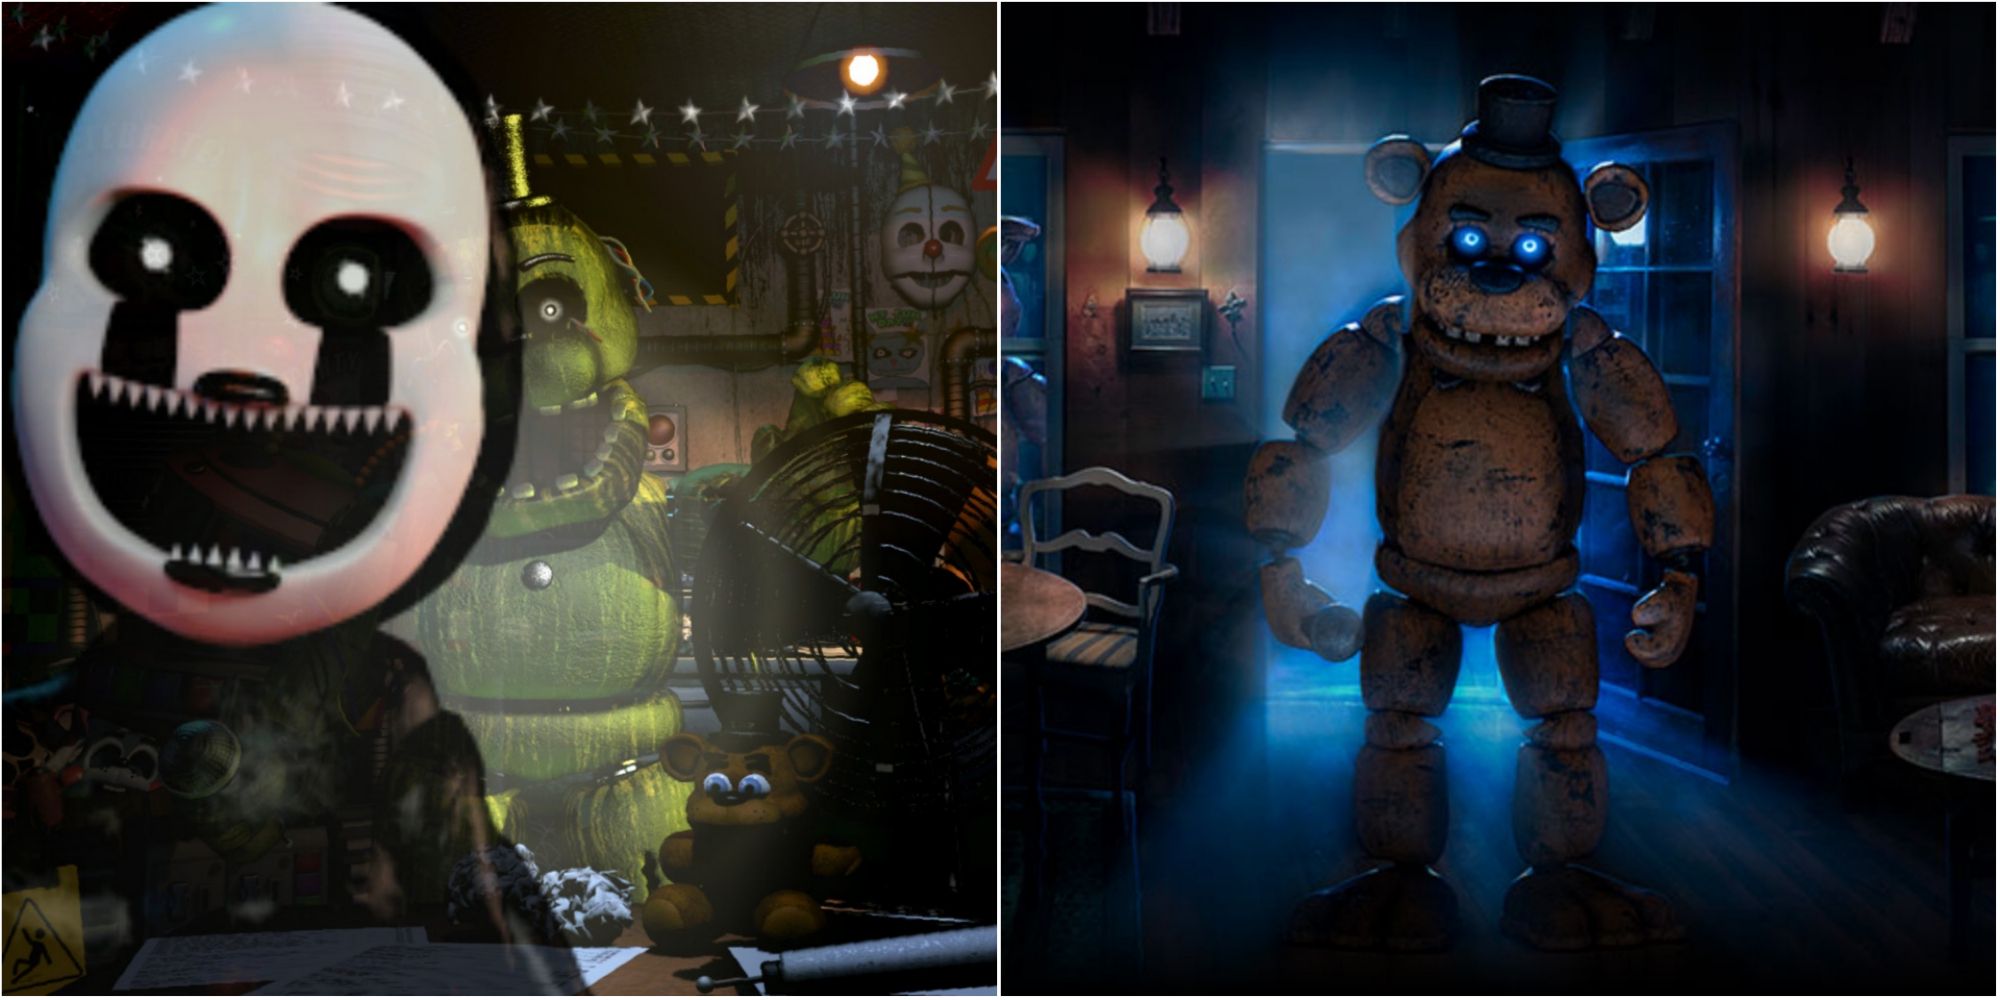 Five Nights at Freddy's is getting an RPG spin-off called FNAF World